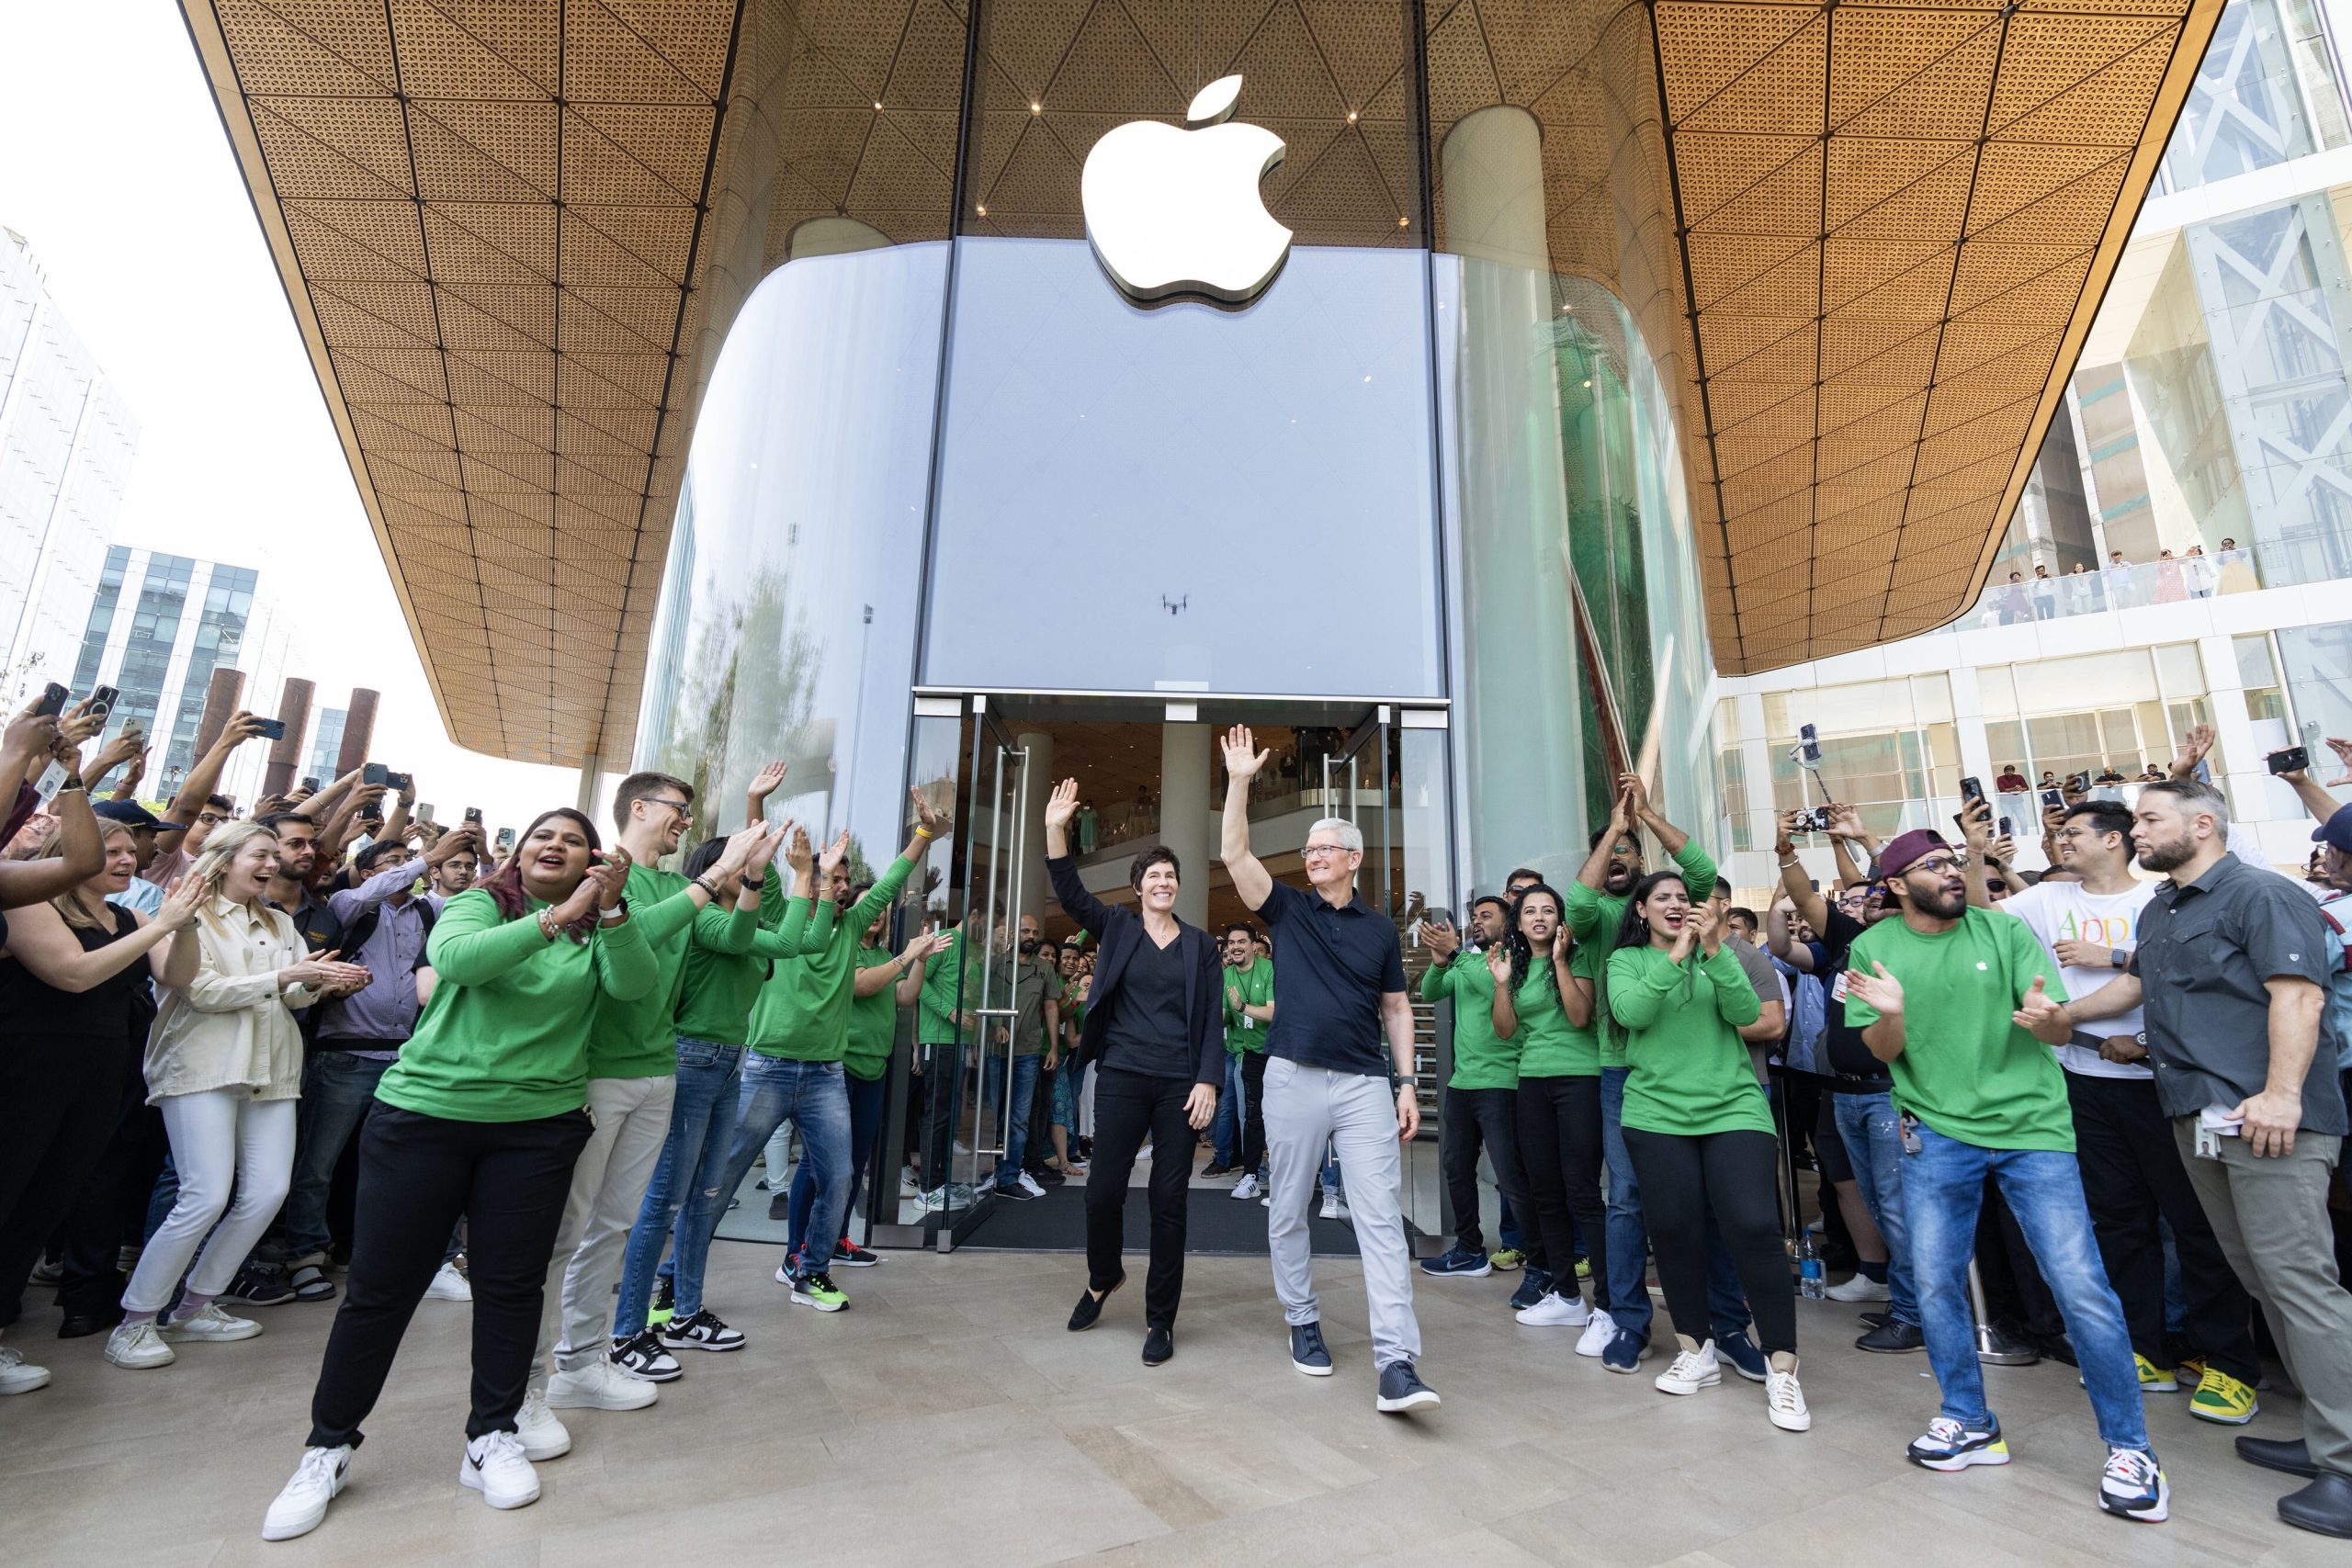 Tim and Deirdre stand and wave in front of the open doors at Apple BKC, surrounded by team members and customers.